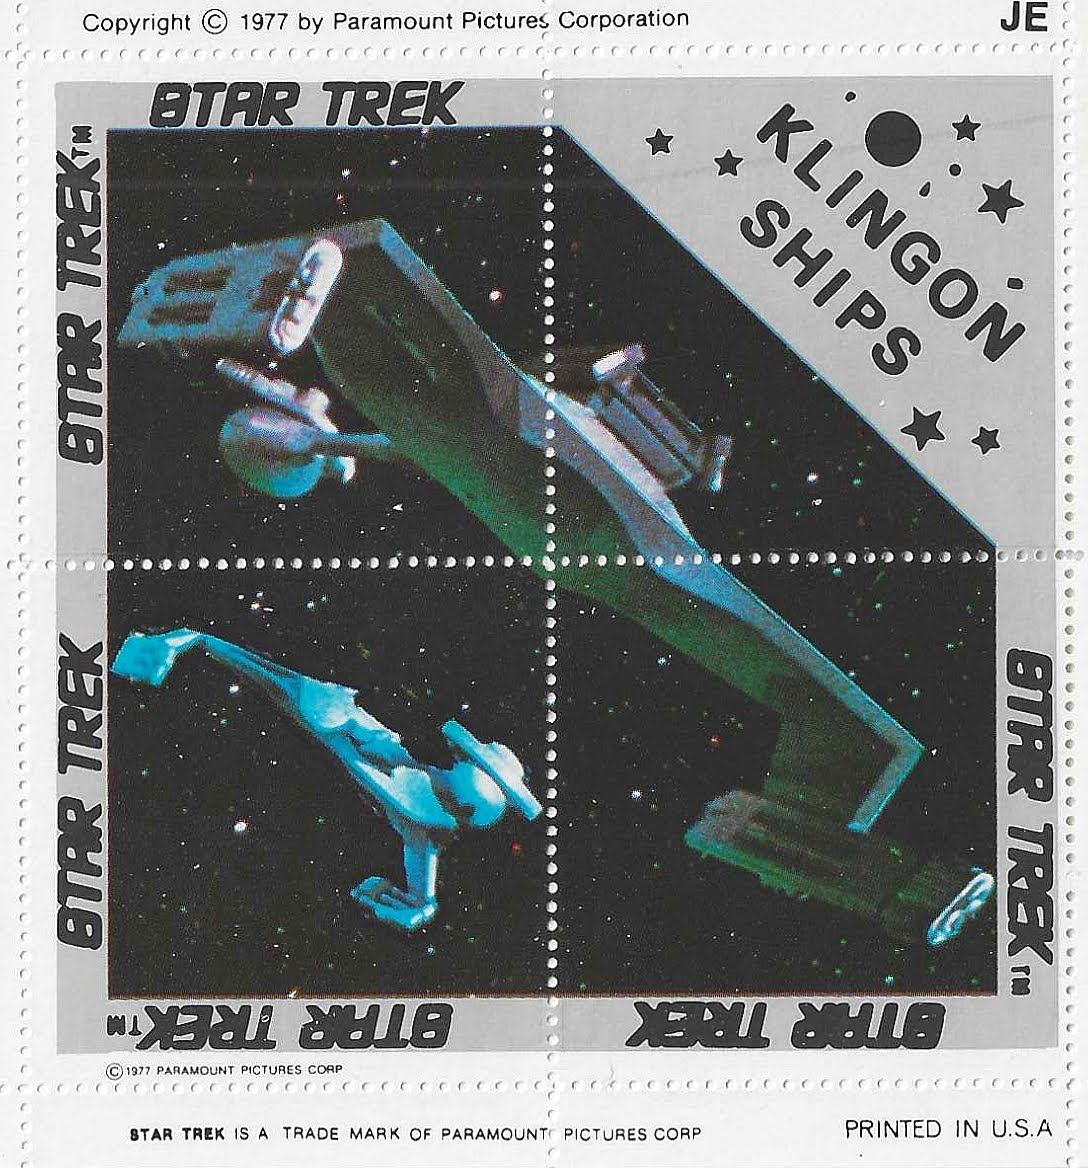 Star Trek stamps from USA